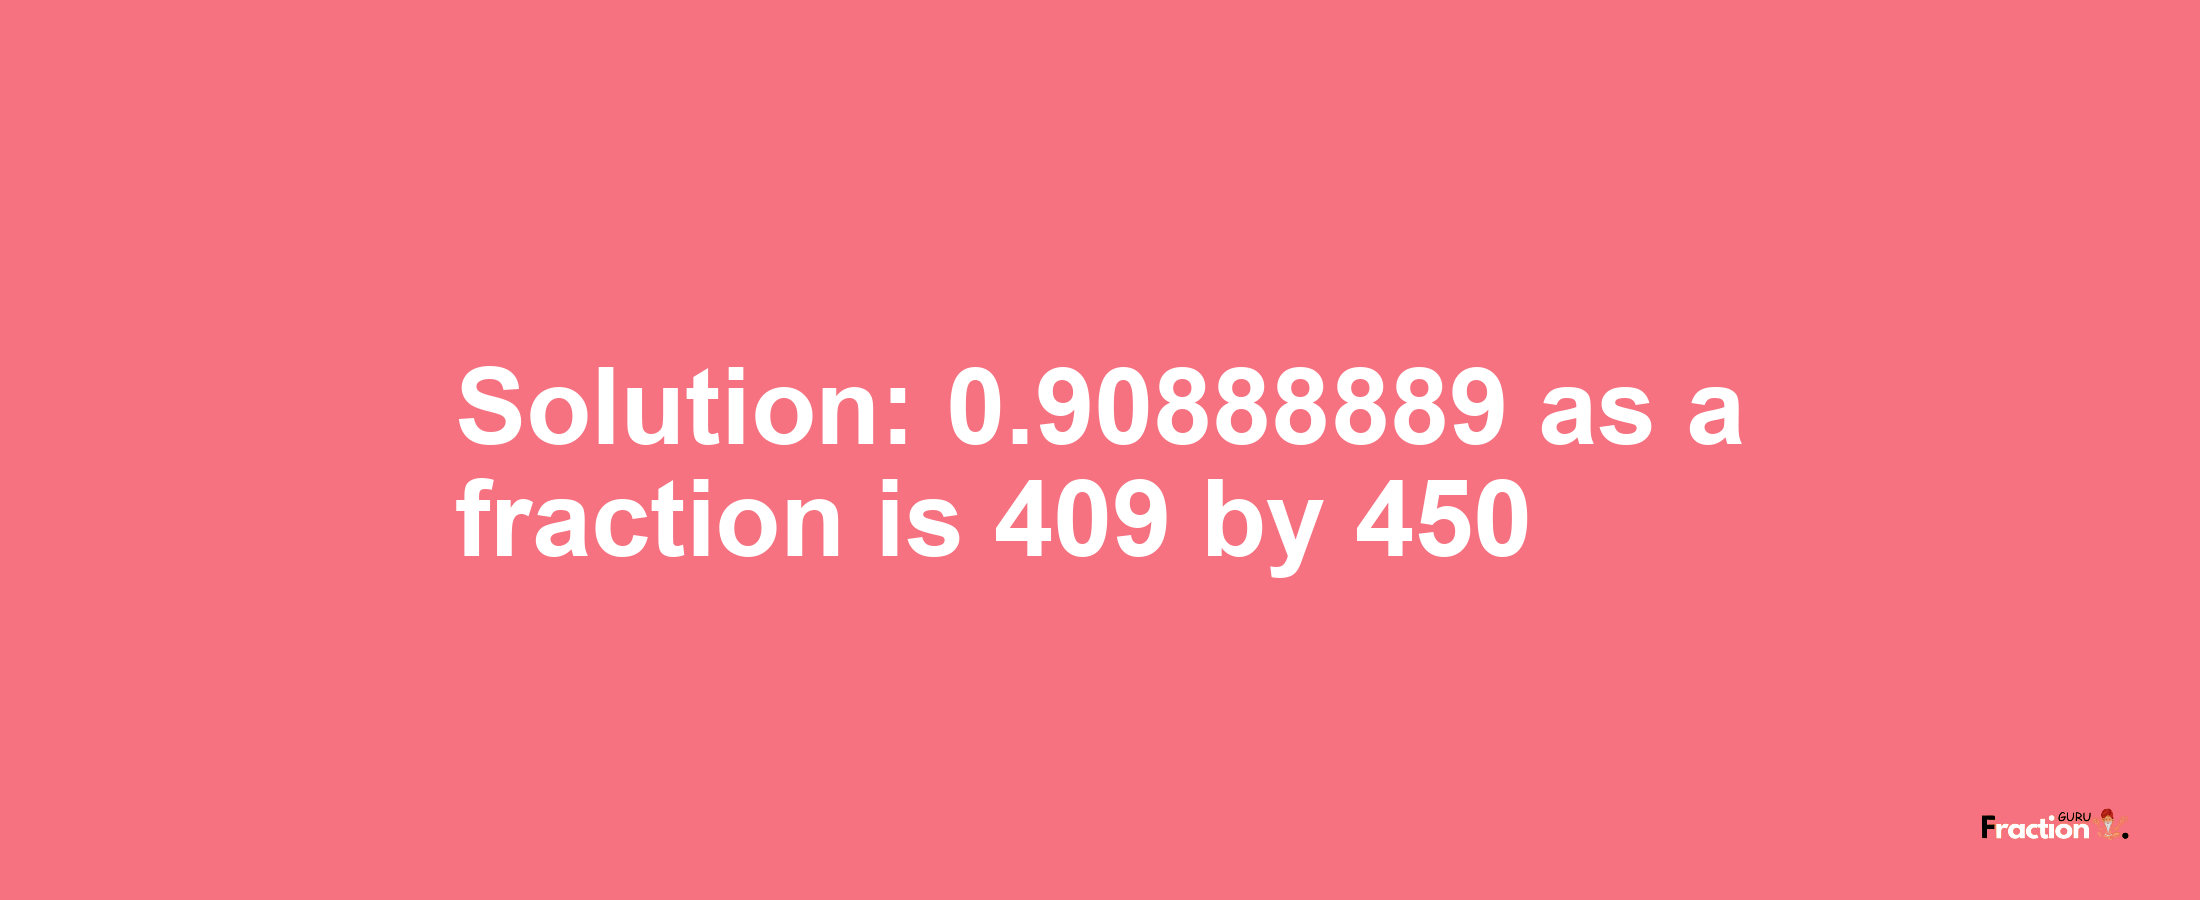 Solution:0.90888889 as a fraction is 409/450